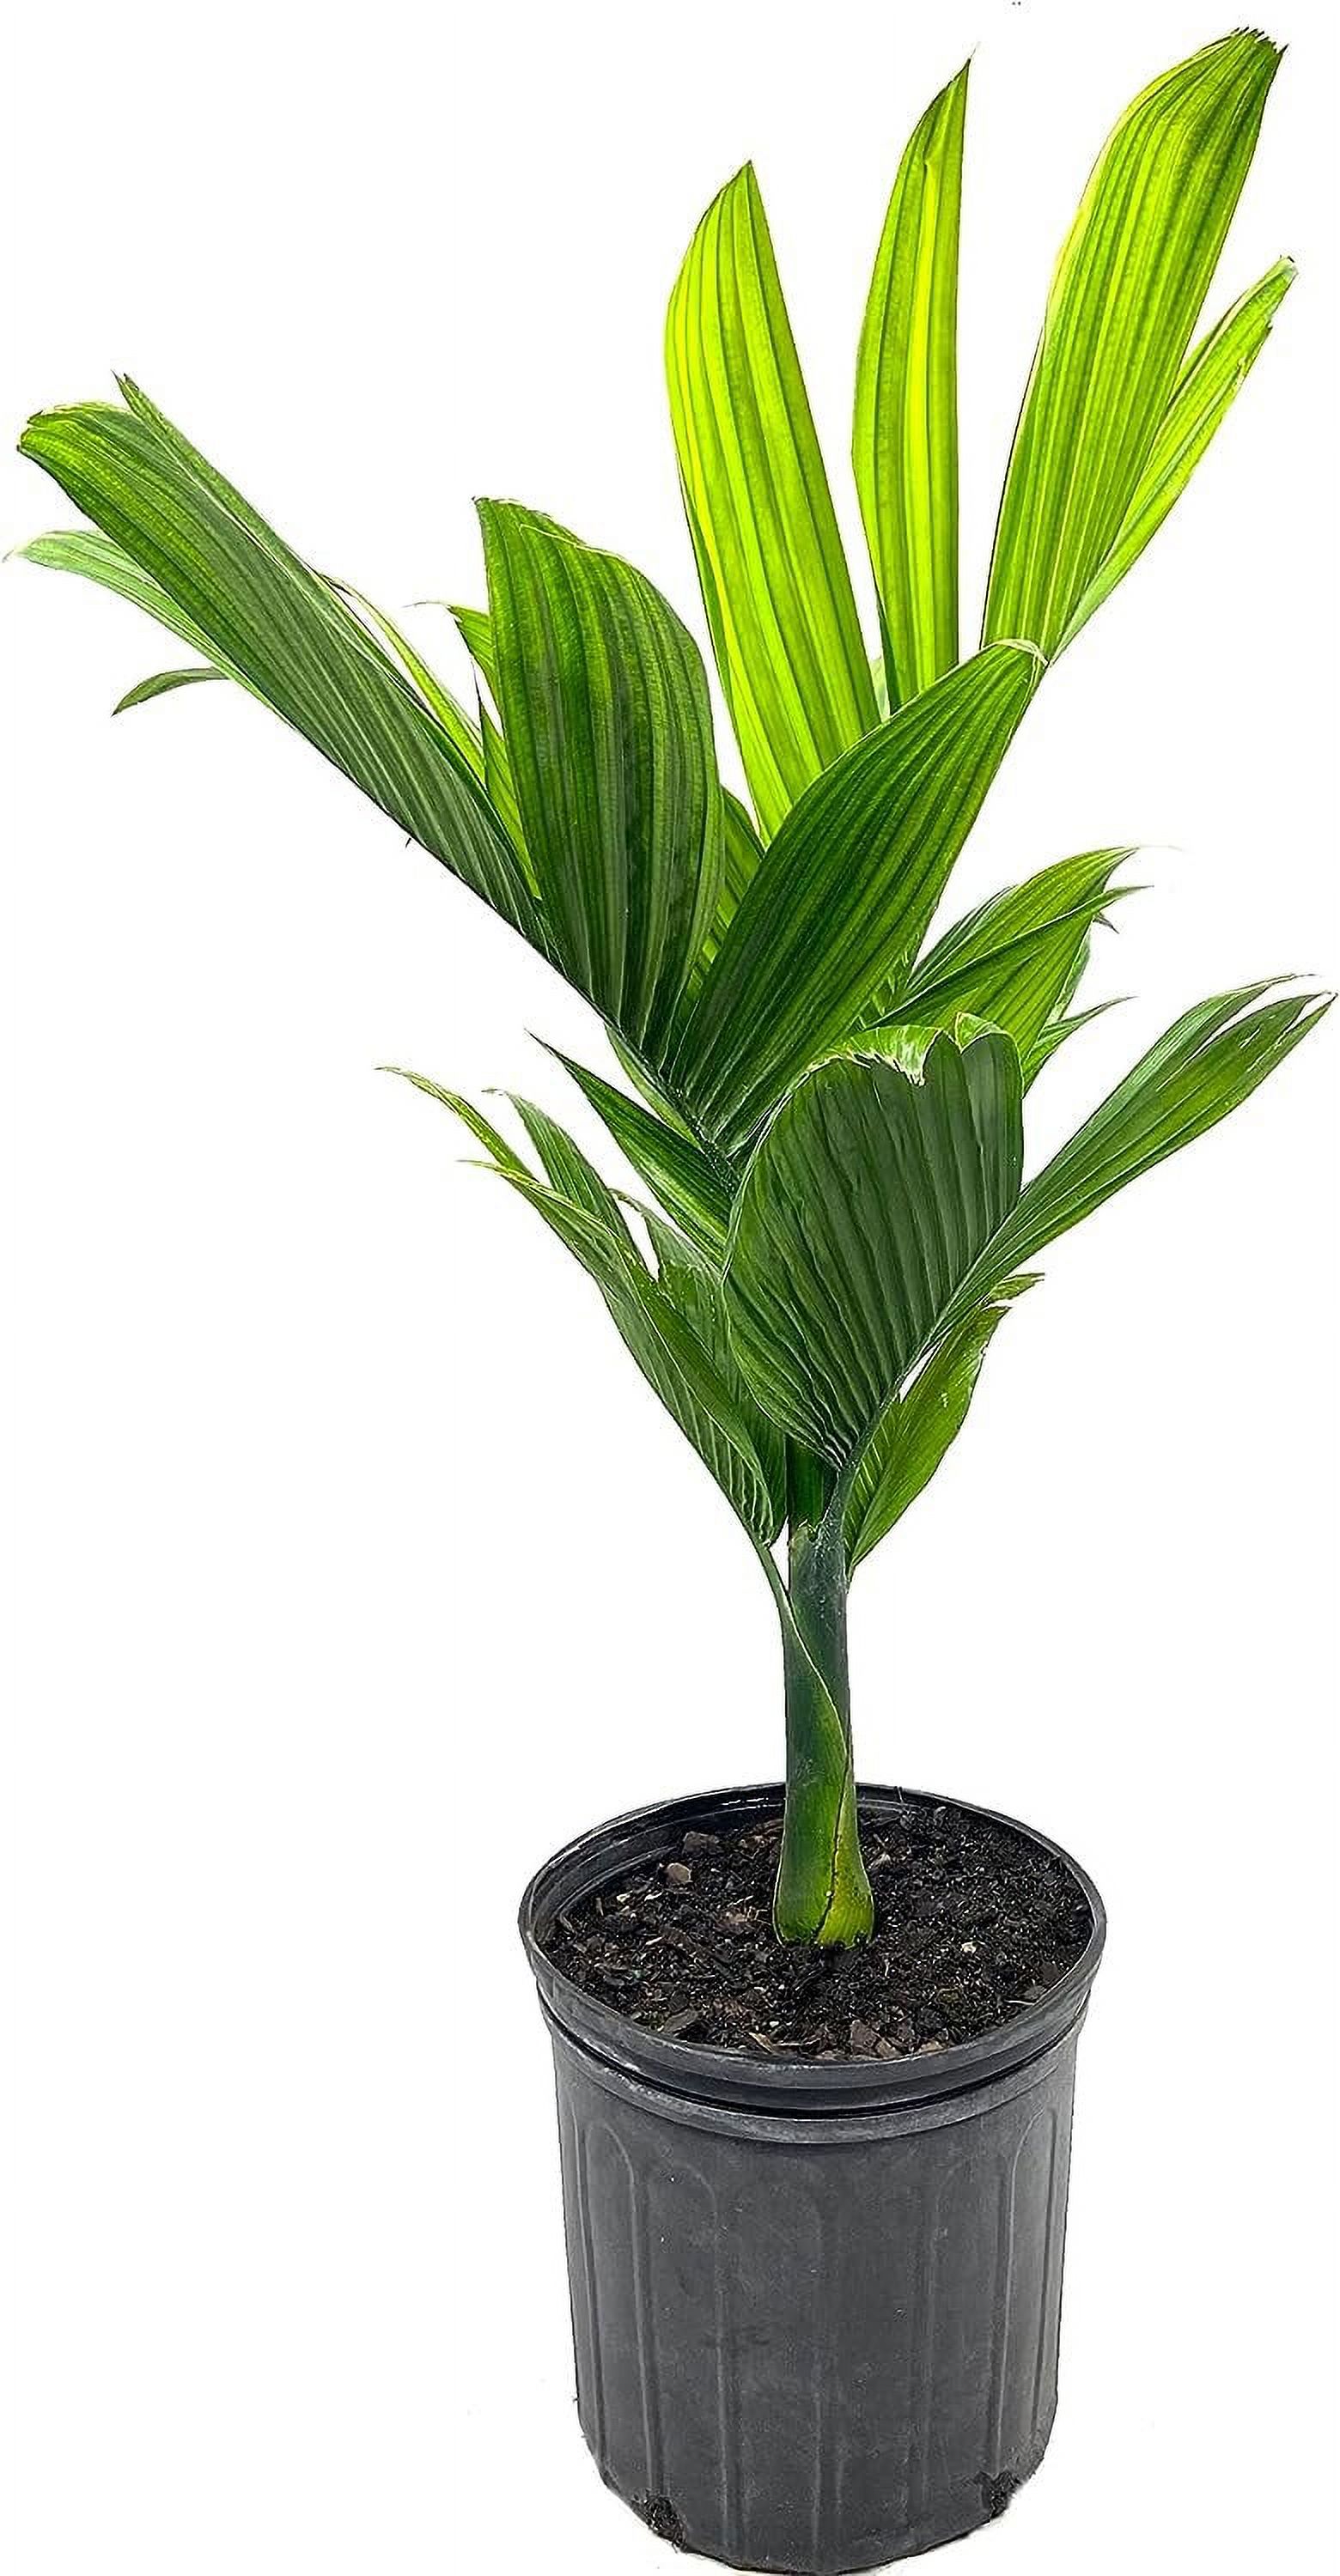 Dwarf Areca Catechu Palm - Live Plant in a 10 Inch Pot - Areca Catechu 'Dwarf' - Breathtaking Ornamental Palms from Florida for The Home and Patio - image 1 of 5